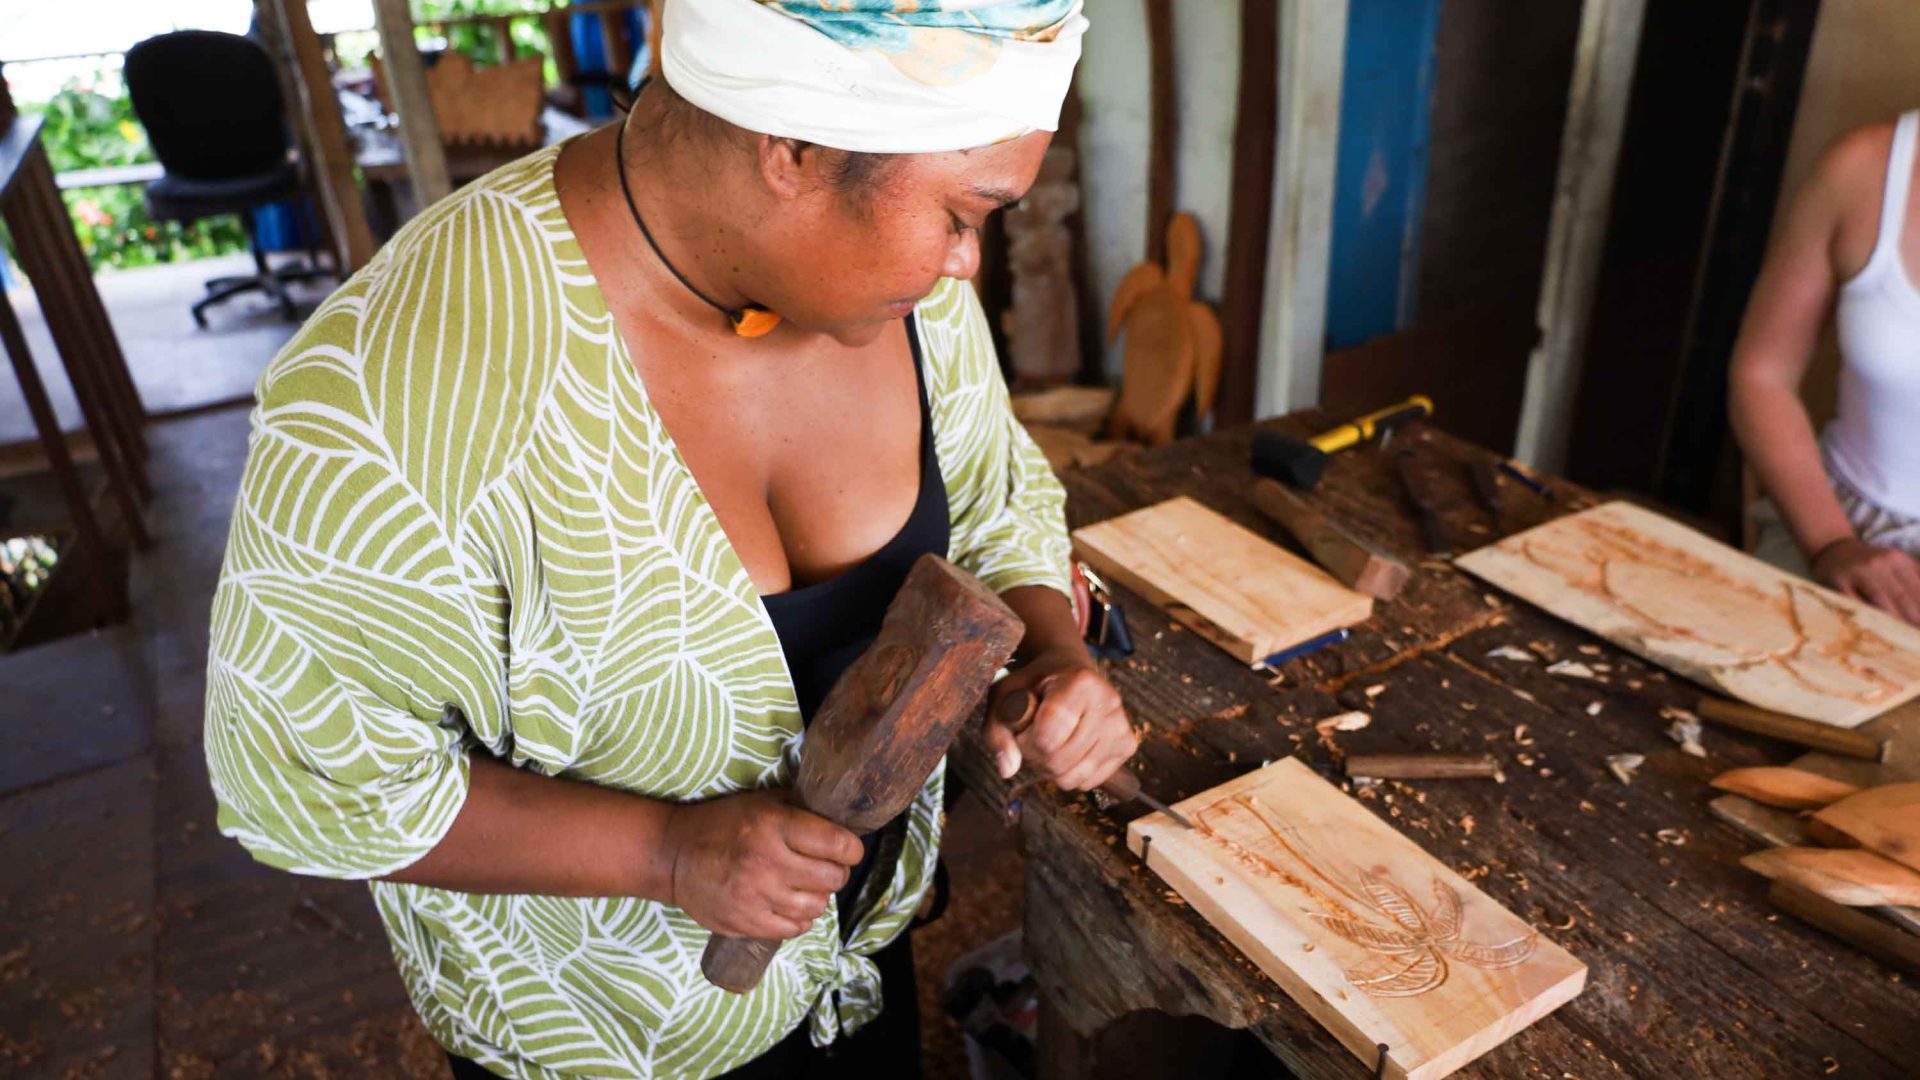 A woman works on a wood carving.